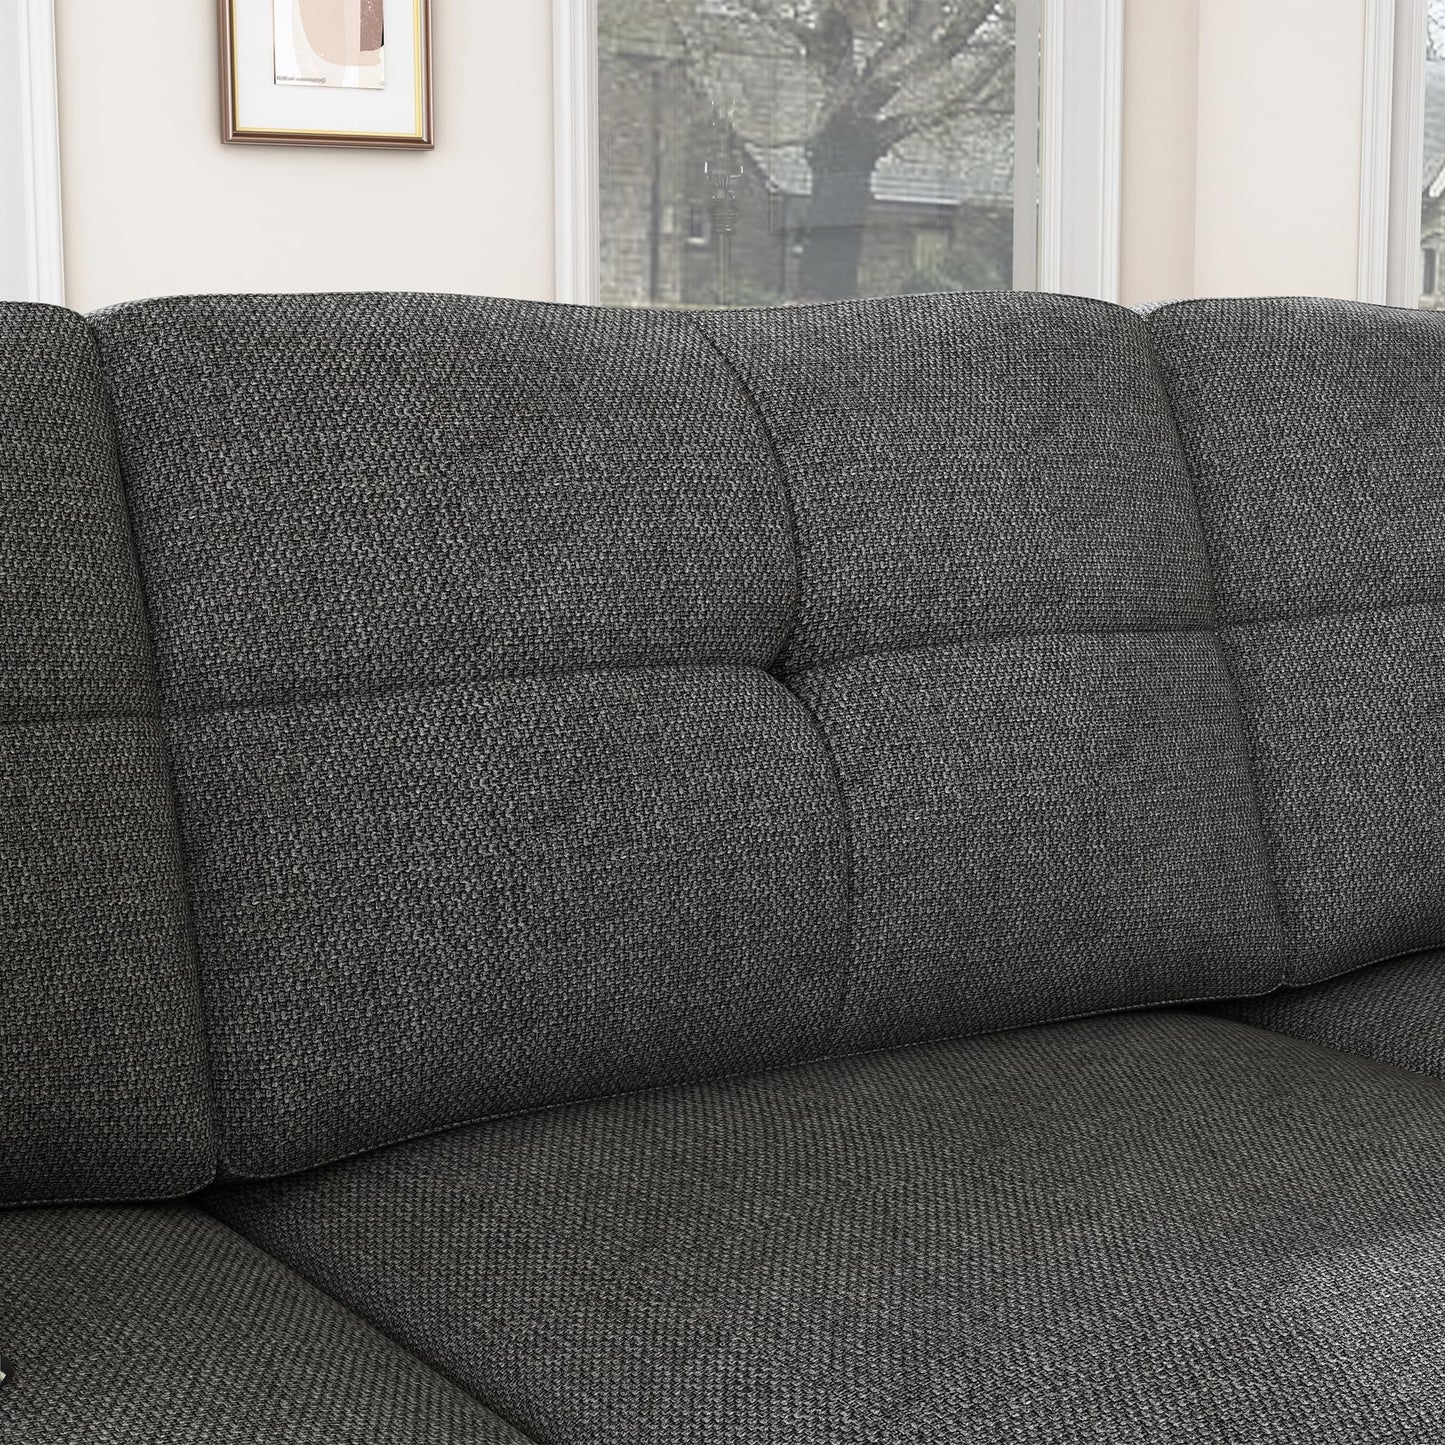 HONBAY Convertible Sectional Sofa, L Shaped Couch, Reversible 4 Seat Corner Sofa for Small Apartment,Dark Grey